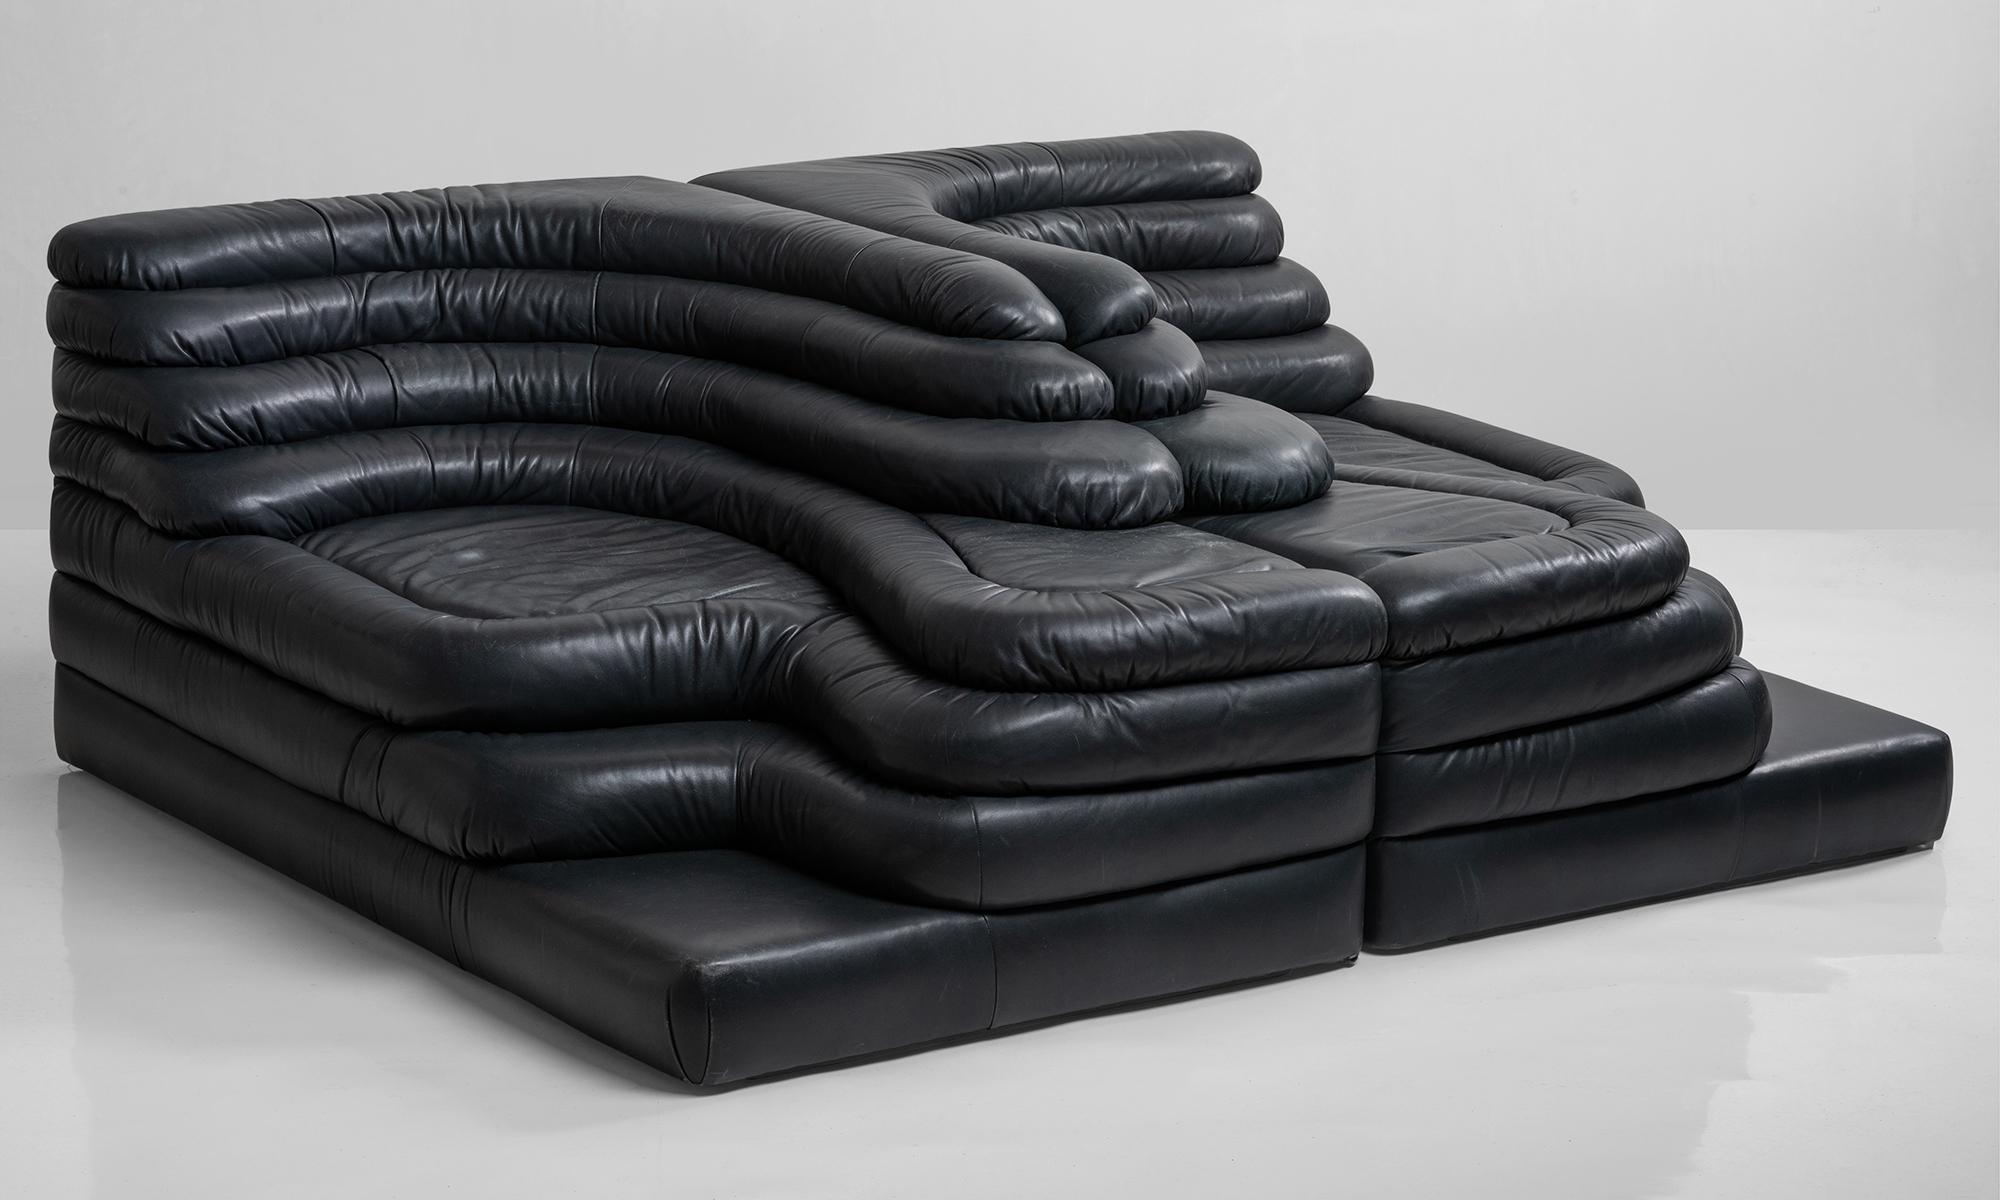 De Sede Terrazza leather sofas, Switzerland, circa 1970.

Wonderful leather waterfall shaped sofa in black leather by the Swiss manufacturer De Sede.